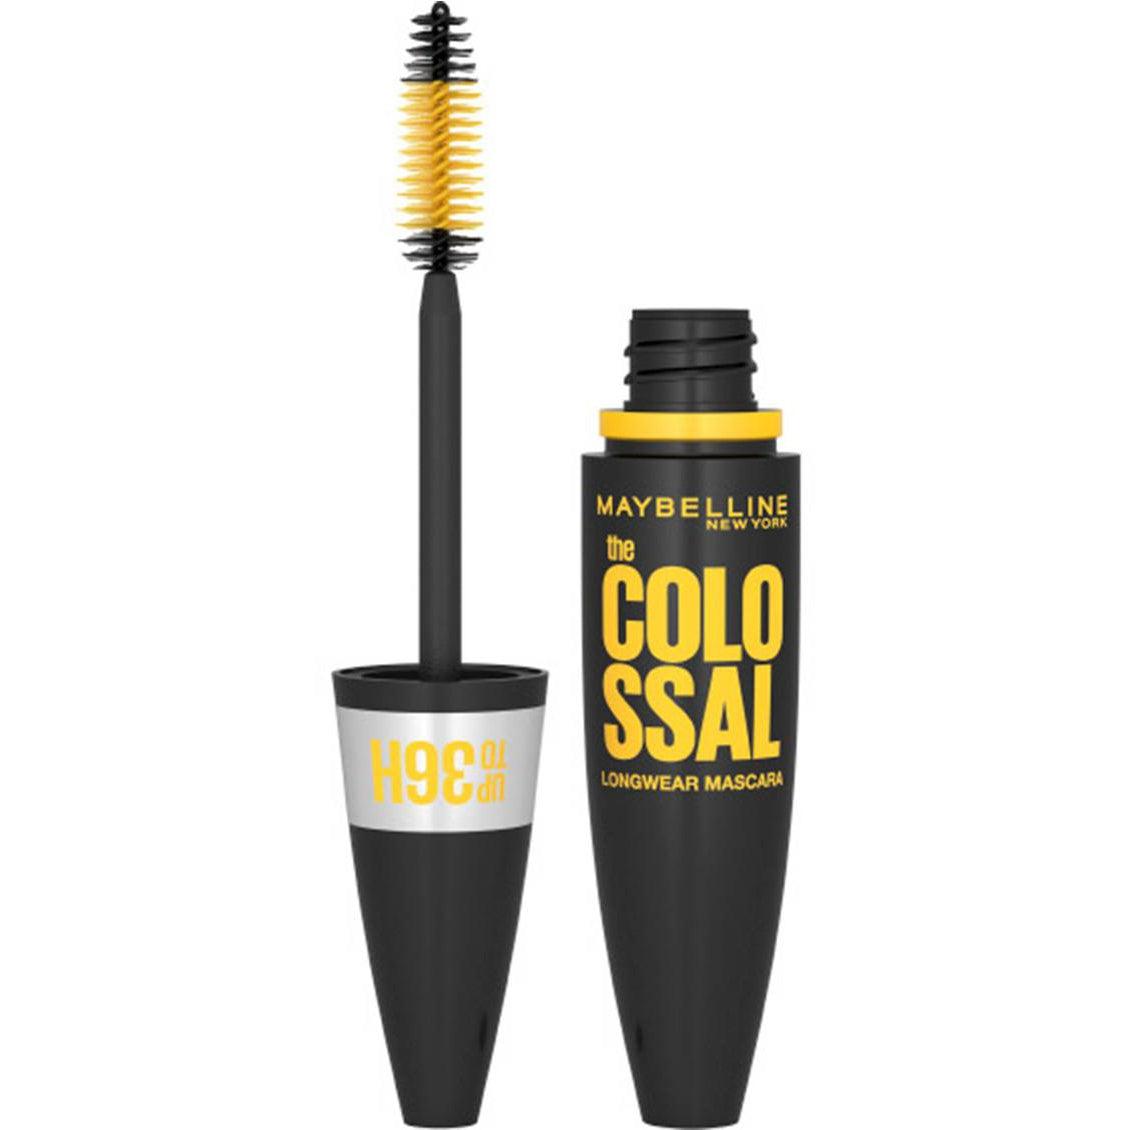 Maybelline The Colossal Mascara 36H Black Waterproof